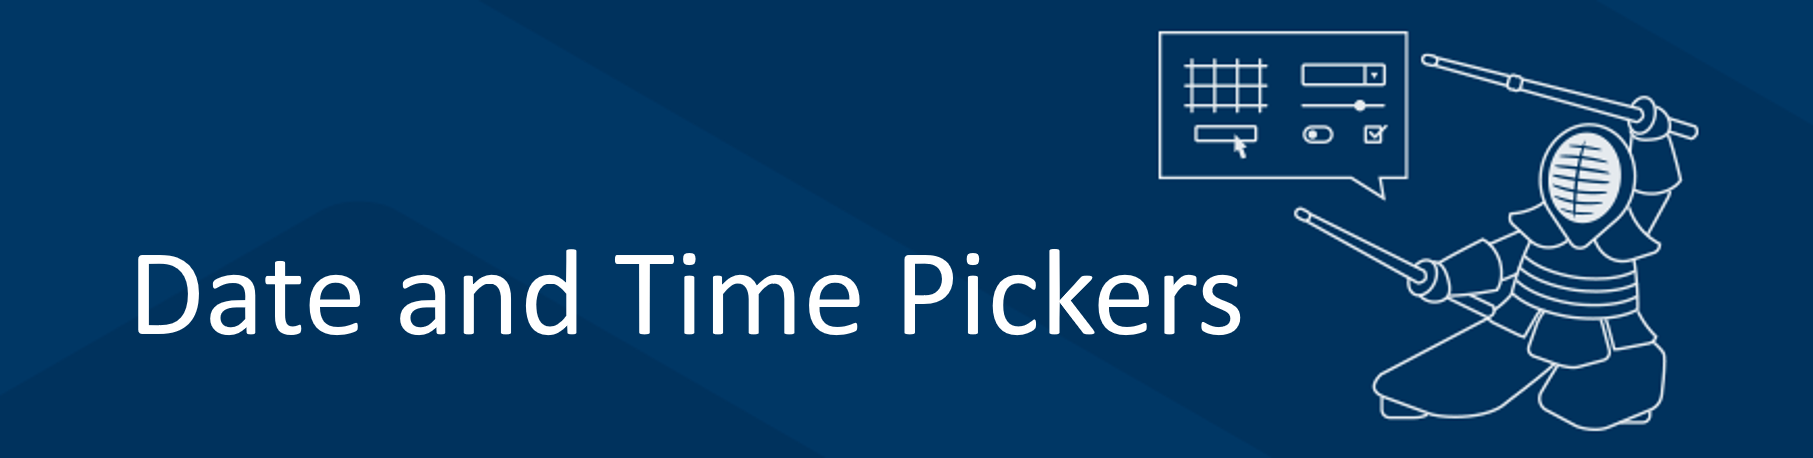 How to Use Date and Time Pickers in Your Web App